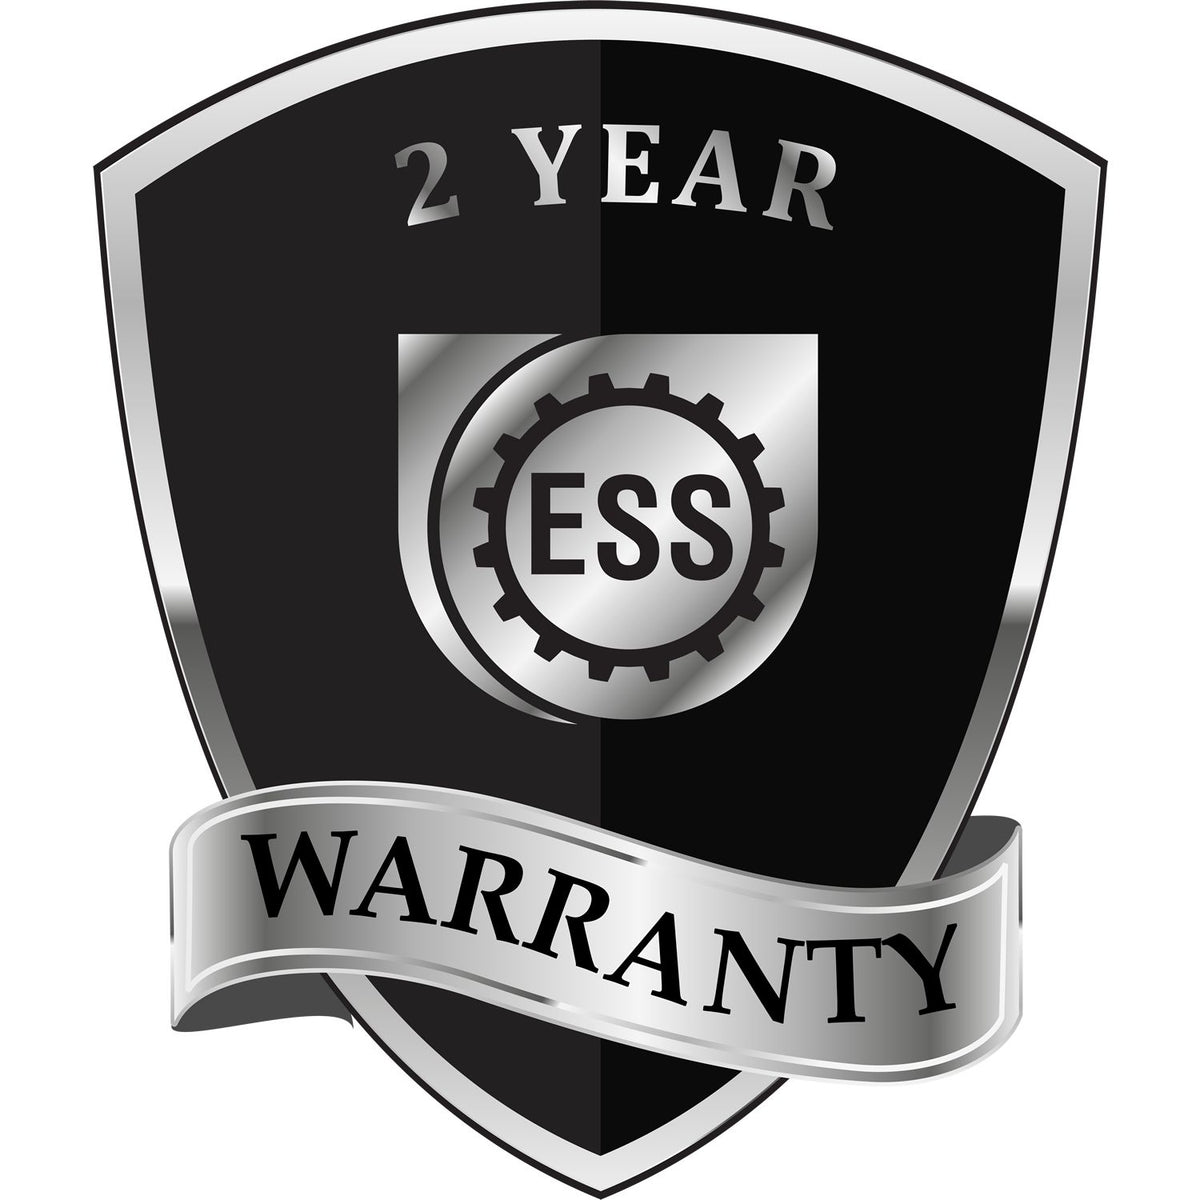 A black and silver badge or emblem showing warranty information for the Handheld Indiana Professional Geologist Embosser